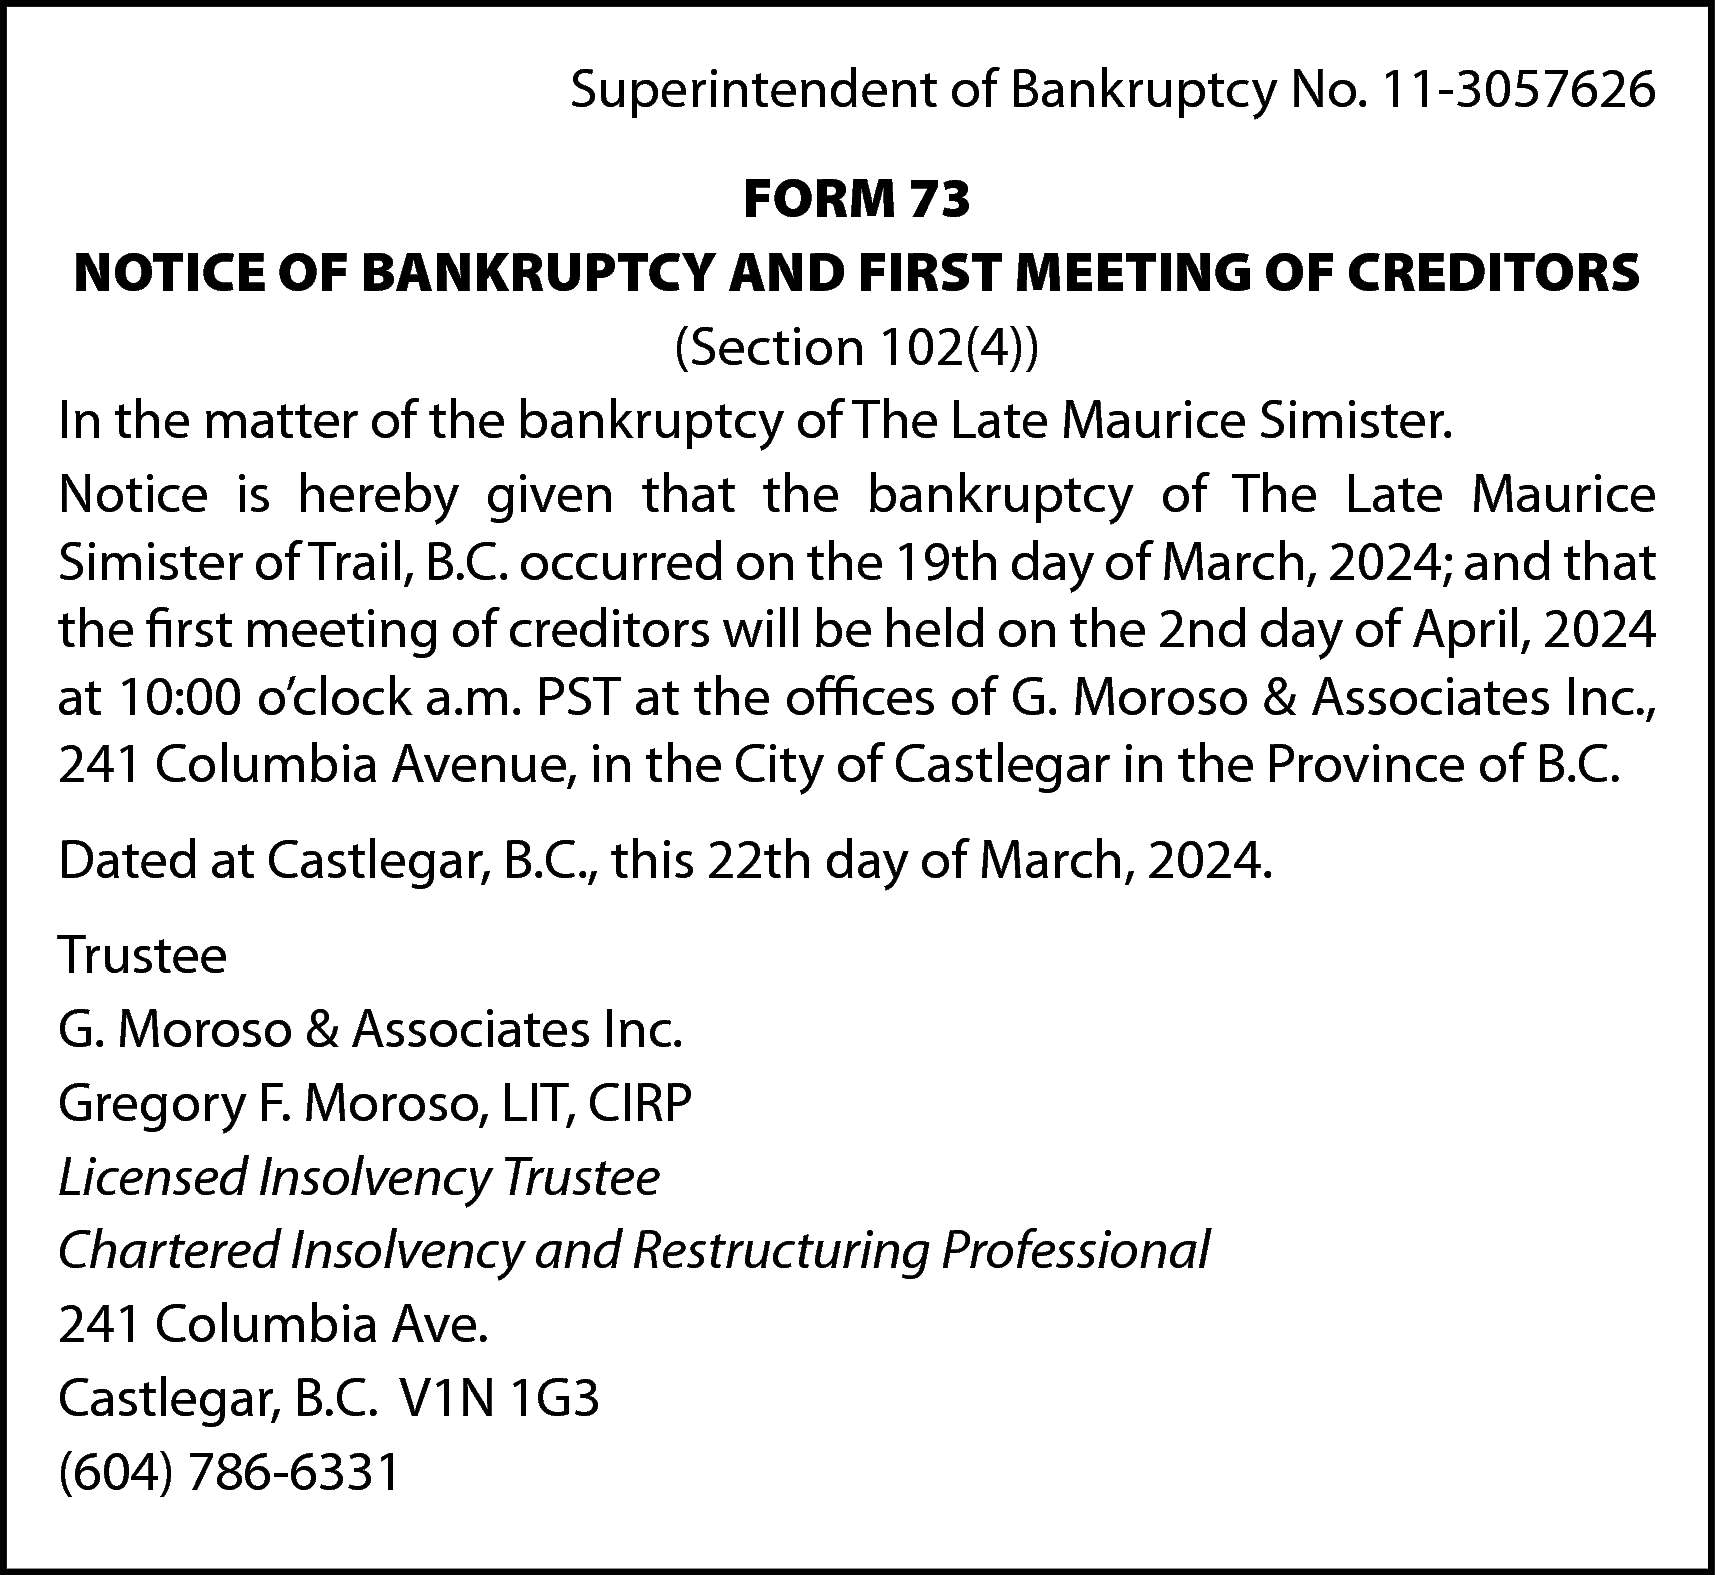 Superintendent of Bankruptcy No. 11-3057626  Superintendent of Bankruptcy No. 11-3057626  FORM 73  NOTICE OF BANKRUPTCY AND FIRST MEETING OF CREDITORS  (Section 102(4))  In the matter of the bankruptcy of The Late Maurice Simister.  Notice is hereby given that the bankruptcy of The Late Maurice  Simister of Trail, B.C. occurred on the 19th day of March, 2024; and that  the first meeting of creditors will be held on the 2nd day of April, 2024  at 10:00 o’clock a.m. PST at the offices of G. Moroso & Associates Inc.,  241 Columbia Avenue, in the City of Castlegar in the Province of B.C.  Dated at Castlegar, B.C., this 22th day of March, 2024.  Trustee  G. Moroso & Associates Inc.  Gregory F. Moroso, LIT, CIRP  Licensed Insolvency Trustee  Chartered Insolvency and Restructuring Professional  241 Columbia Ave.  Castlegar, B.C. V1N 1G3  (604) 786-6331    